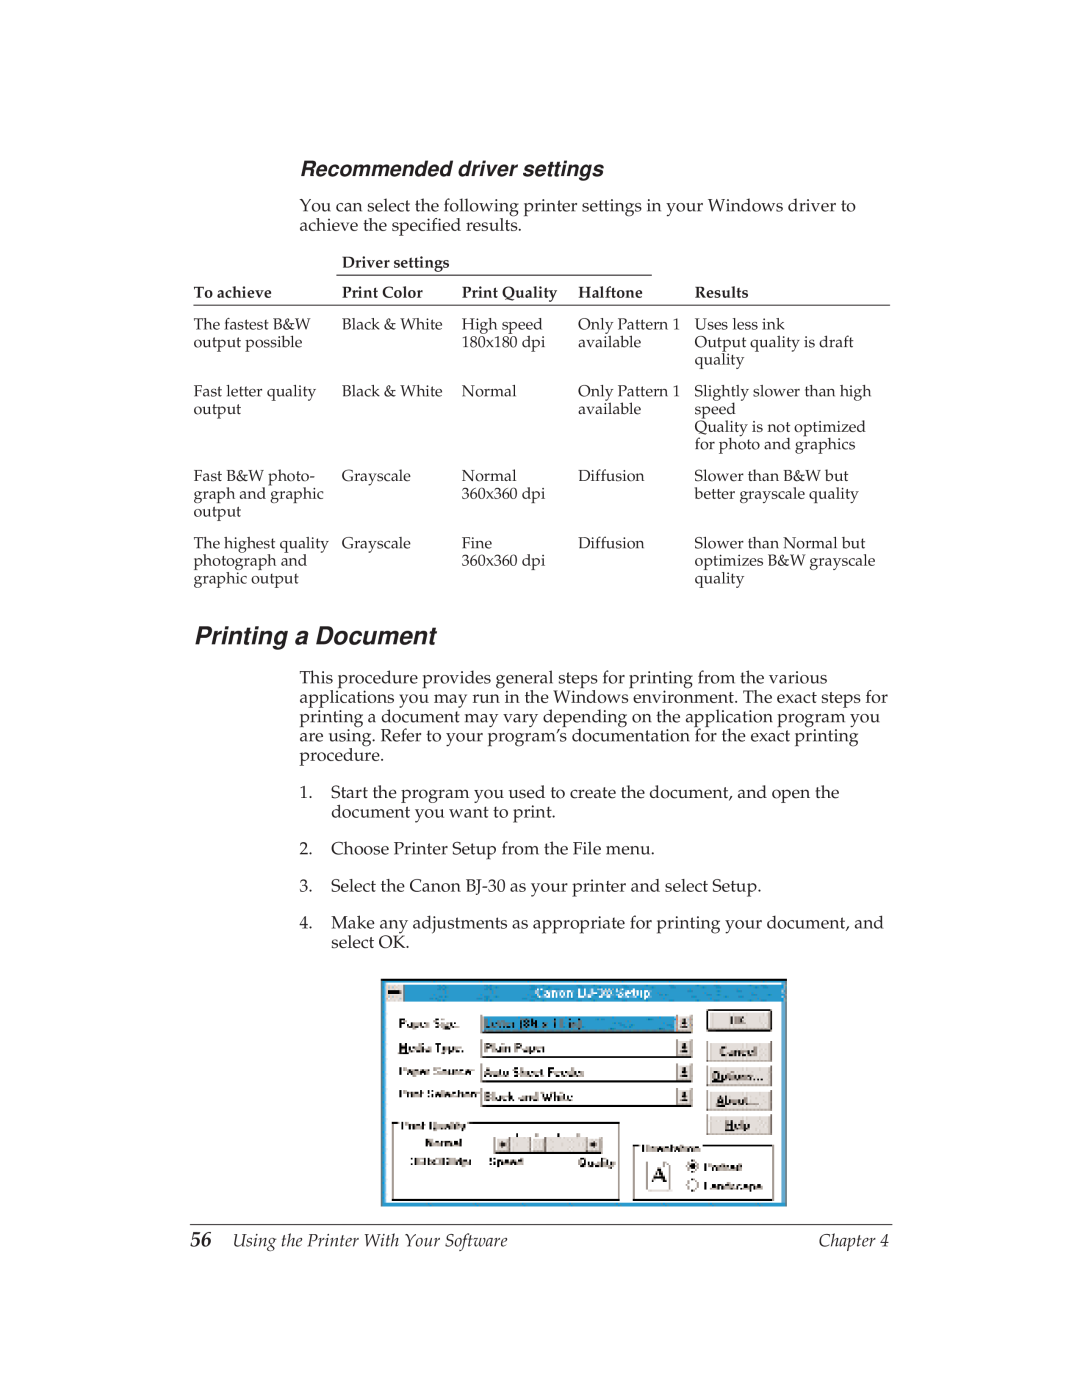 Canon BJ-30 manual Printing a Document, Recommended driver settings 